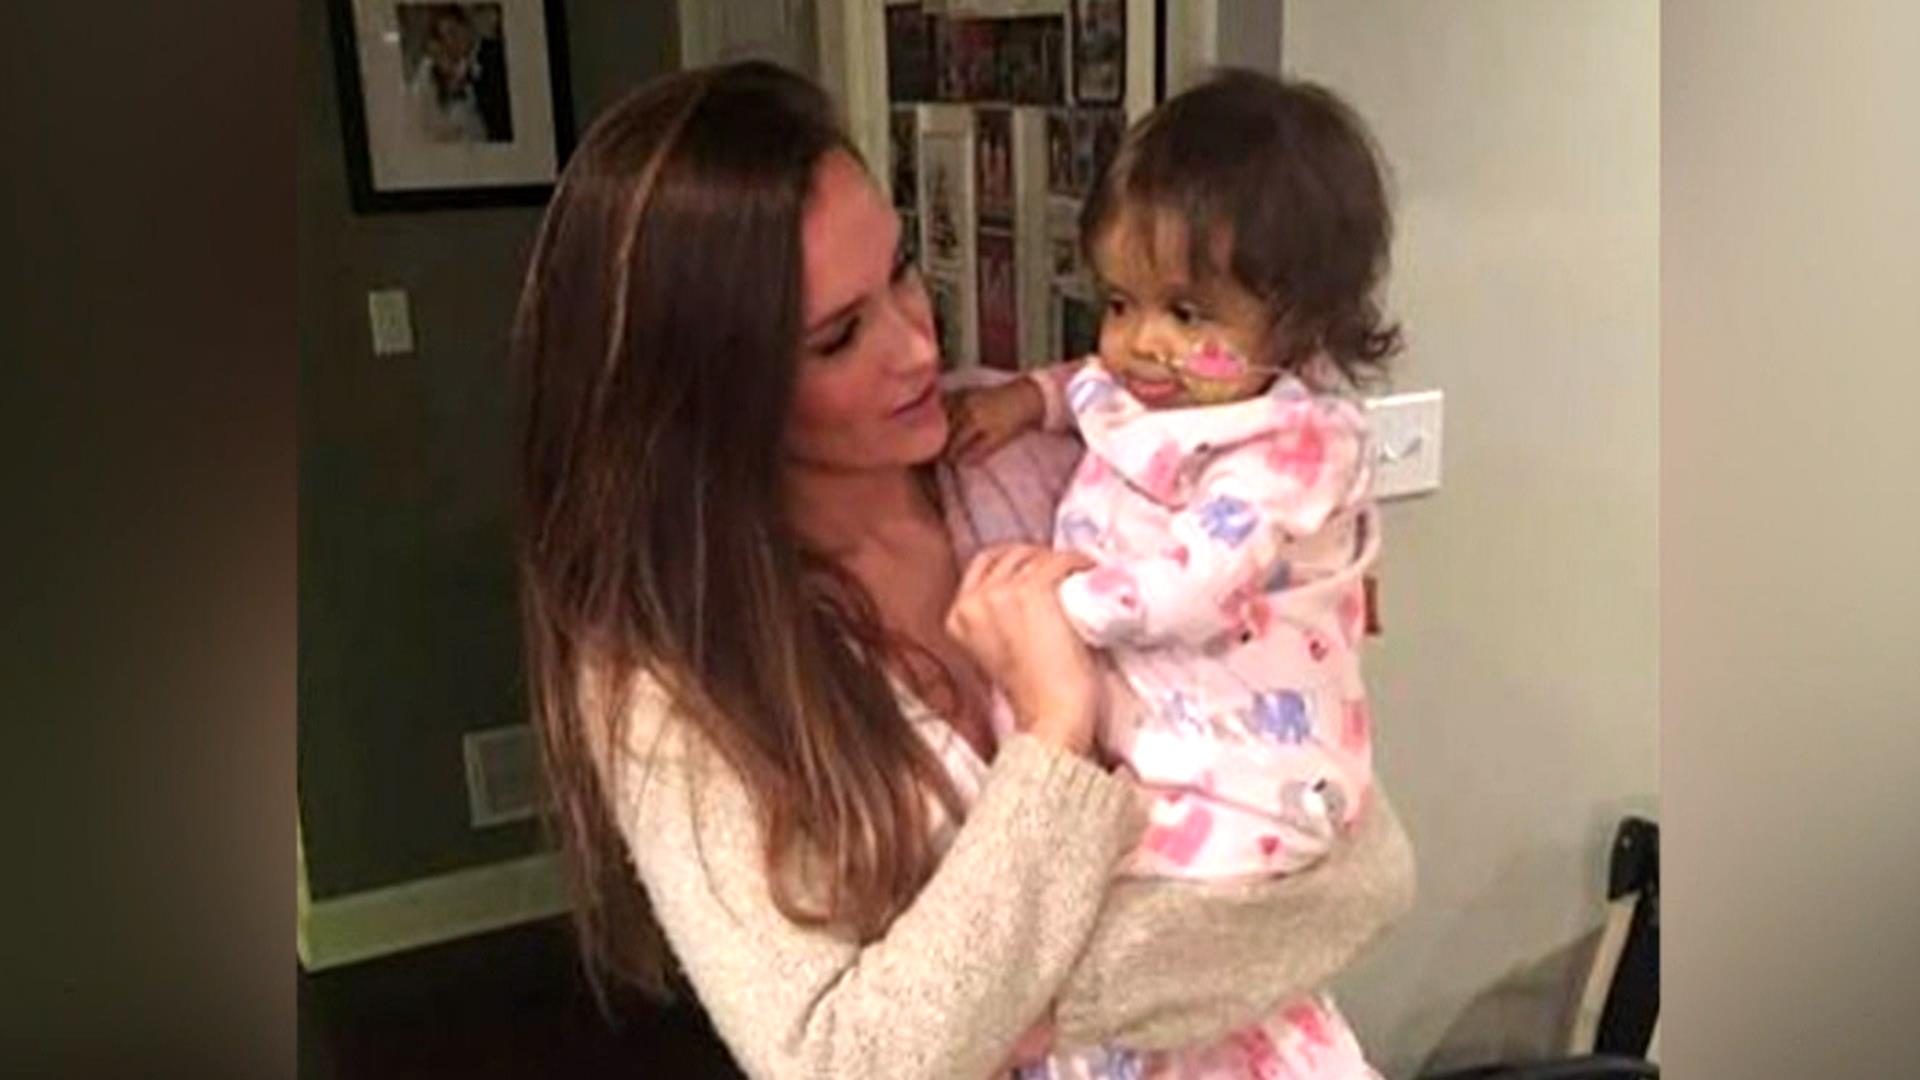 Meet the nanny who donated part of her liver to save baby's life